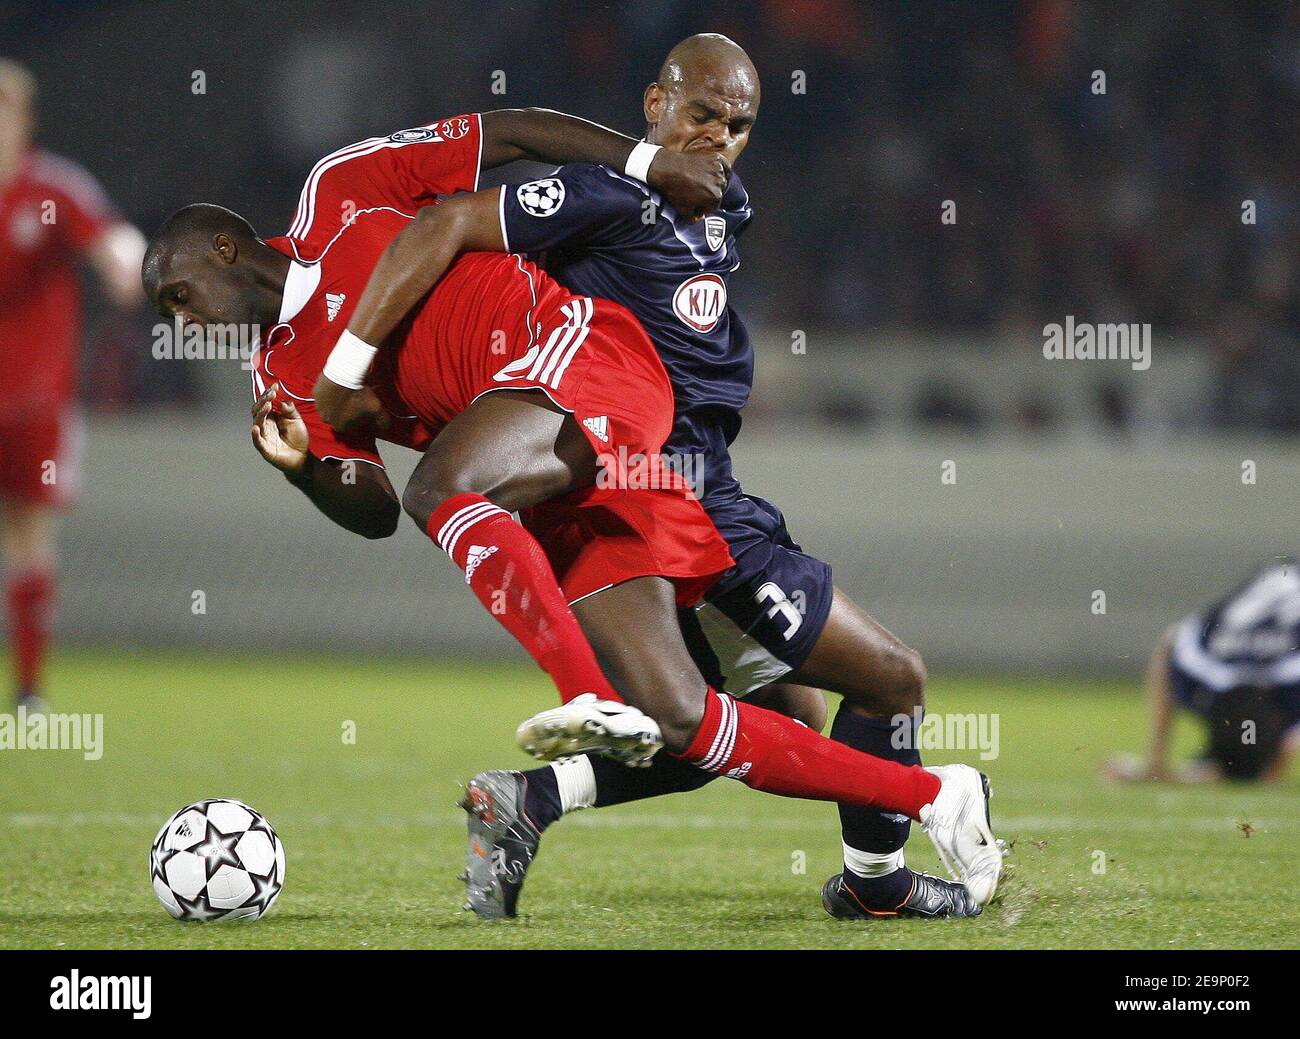 Liverpool's Mohamed Sissoko and Bordeaux' Henrique battle for the ball during the UEFA Champions League, Group C, Girondins de Bordeaux vs Liverpool FC at the Stade Chaban-Delmas in Bordeaux, France on October 18, 2006. Liverpool won 1-0. Photo by Christian Liewig/ABACAPRESS.COM Stock Photo